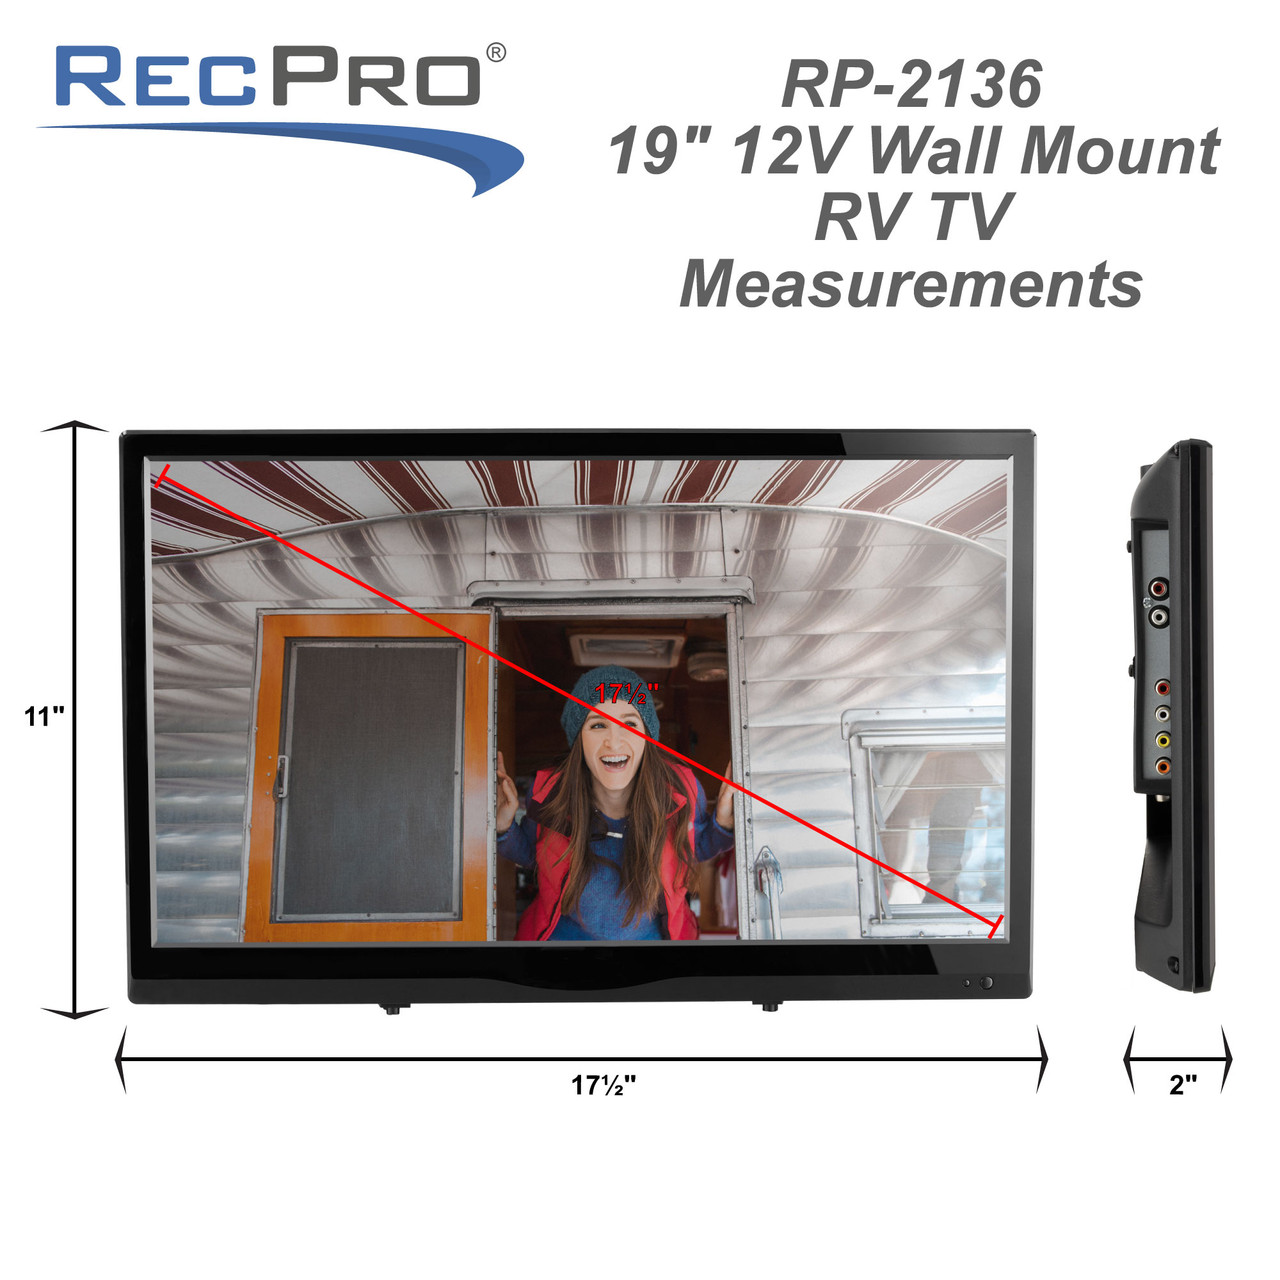 temperamento torneo Probablemente RV 19" Television 720p LED Screen 12/120-Volt TV Wall Mounted - RecPro